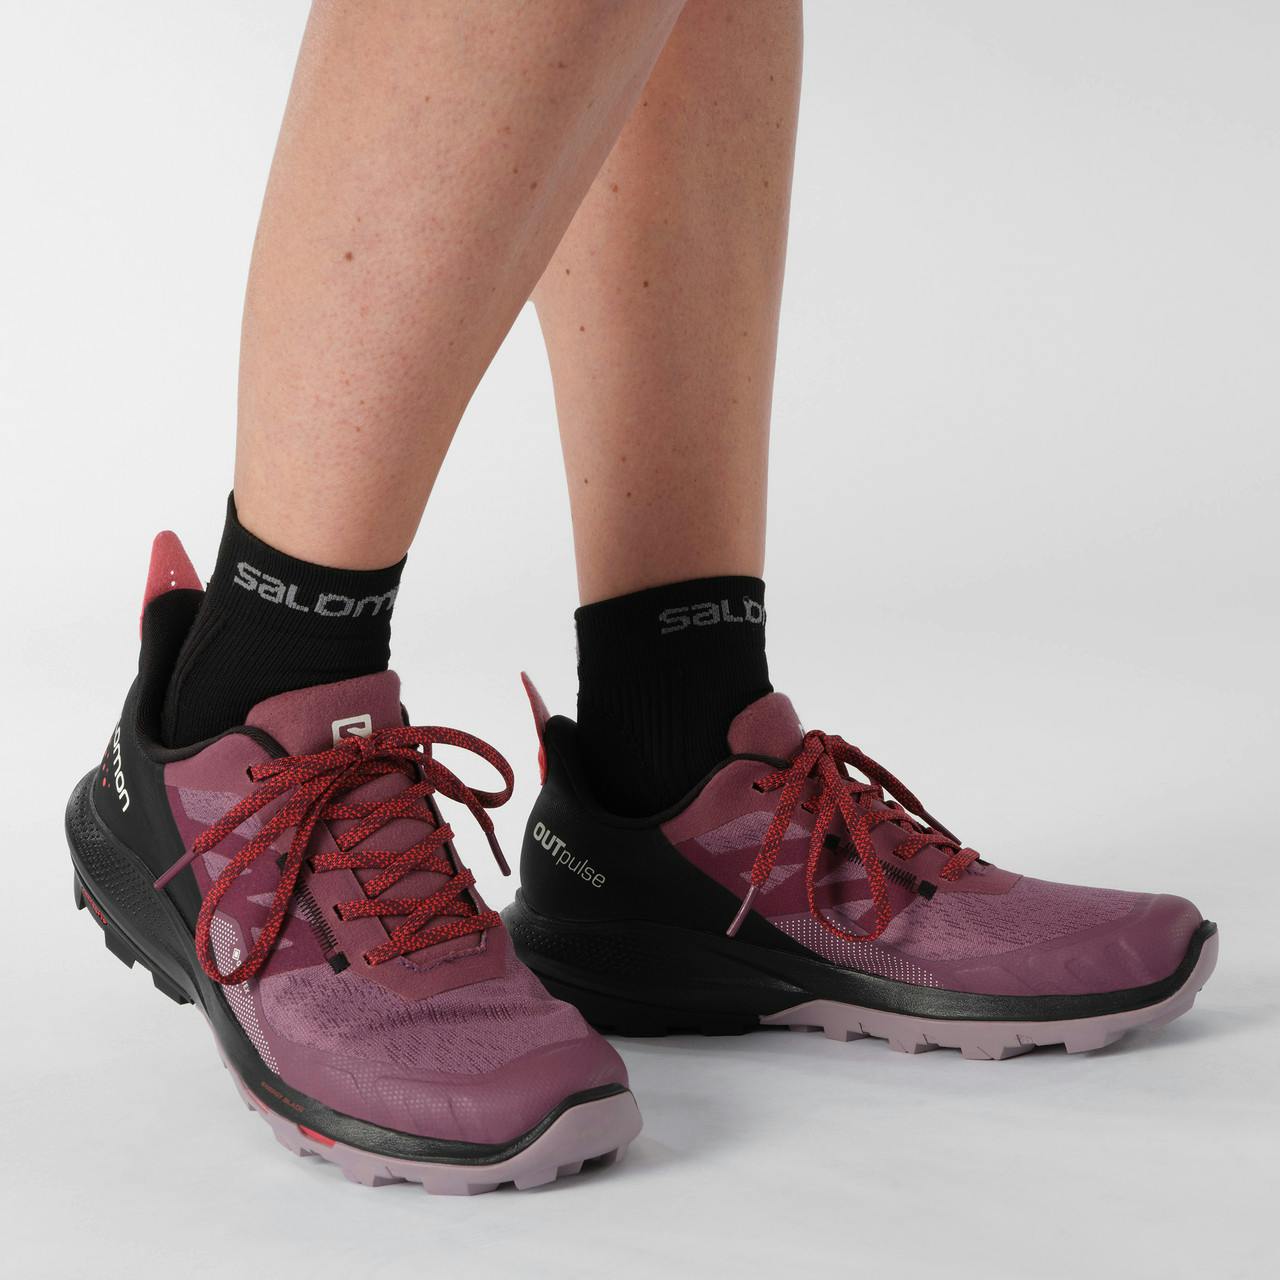 OUTpulse Gore-Tex Light Trail Shoes Tulipwood/Black/Poppy Red